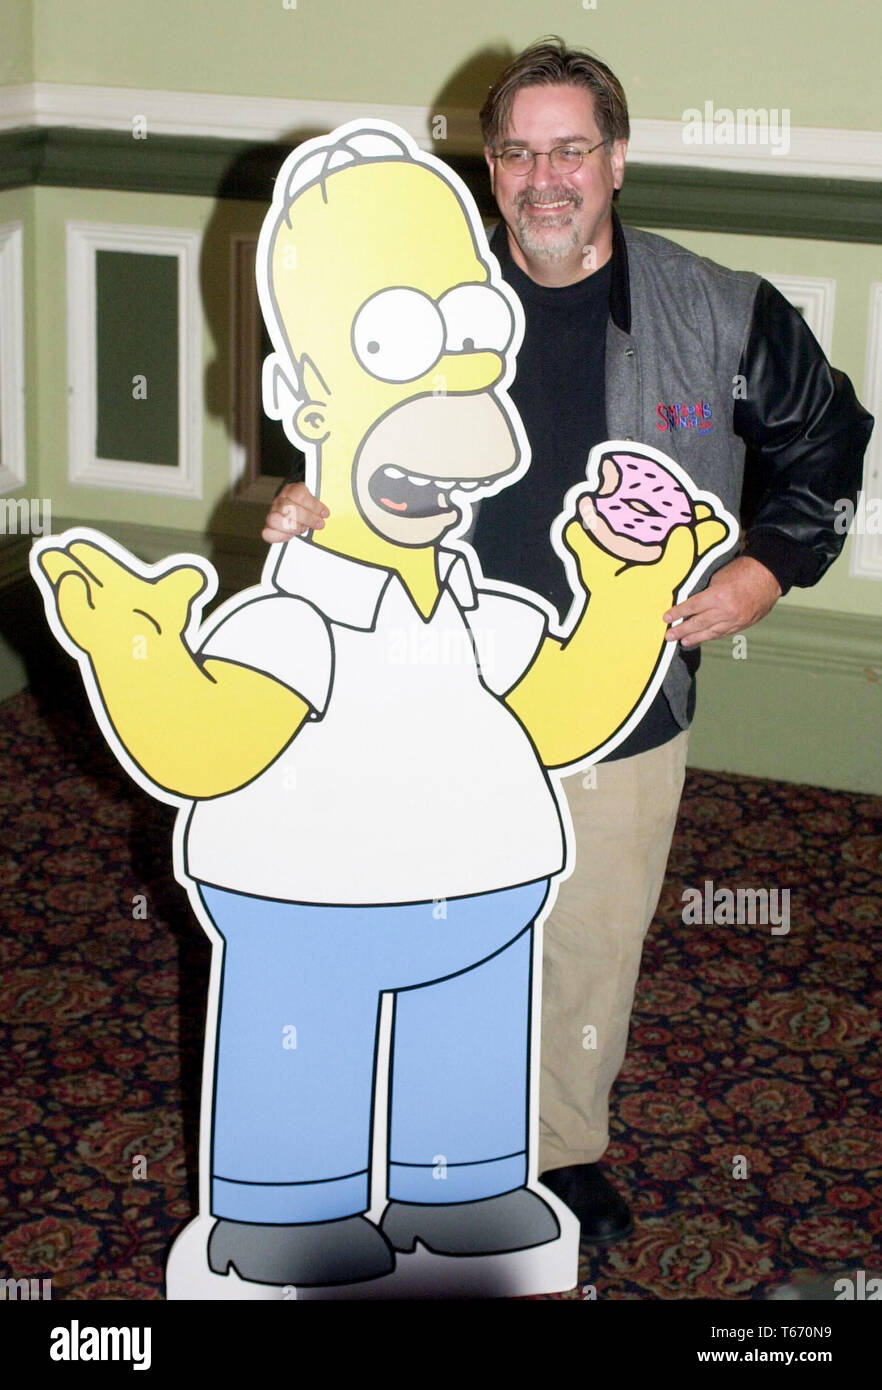 Celebrating ten years of The Simpsons on Sky One, The Simpsons Mania Tour started at The Assembley Rooms in Edinburgh tonight, Monday 14/8/00.  The voices behind the characters performed a rare live read of one of the scripts aided by the series creator Matt Groening. Matt is pictured with his character Homer. Stock Photo